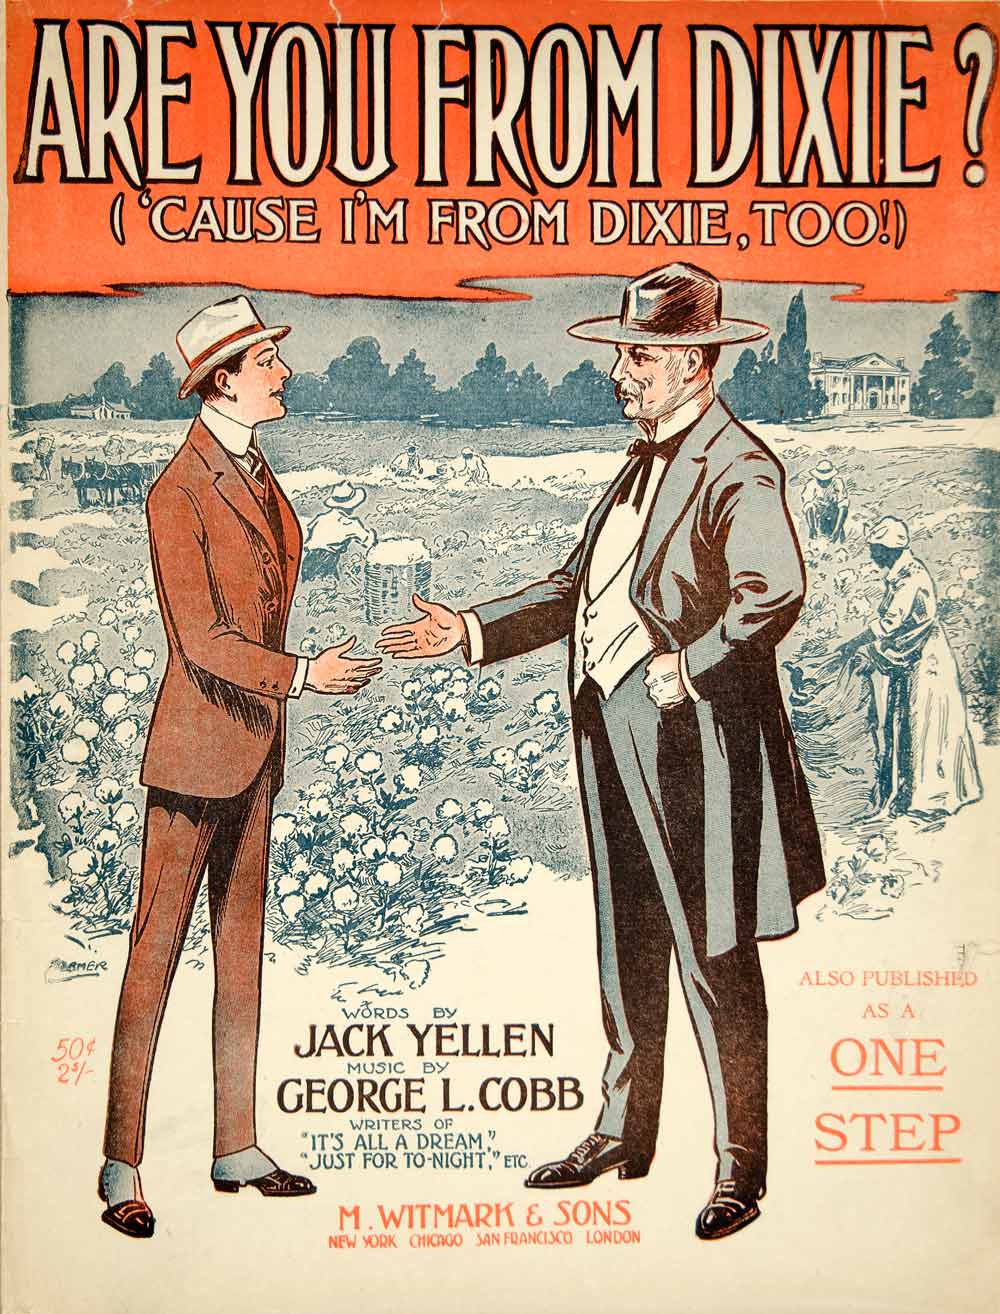 1915 Sheet Music Are You From Dixie? Cottom Field Pickers Jack Yellen Cobb ZSM7